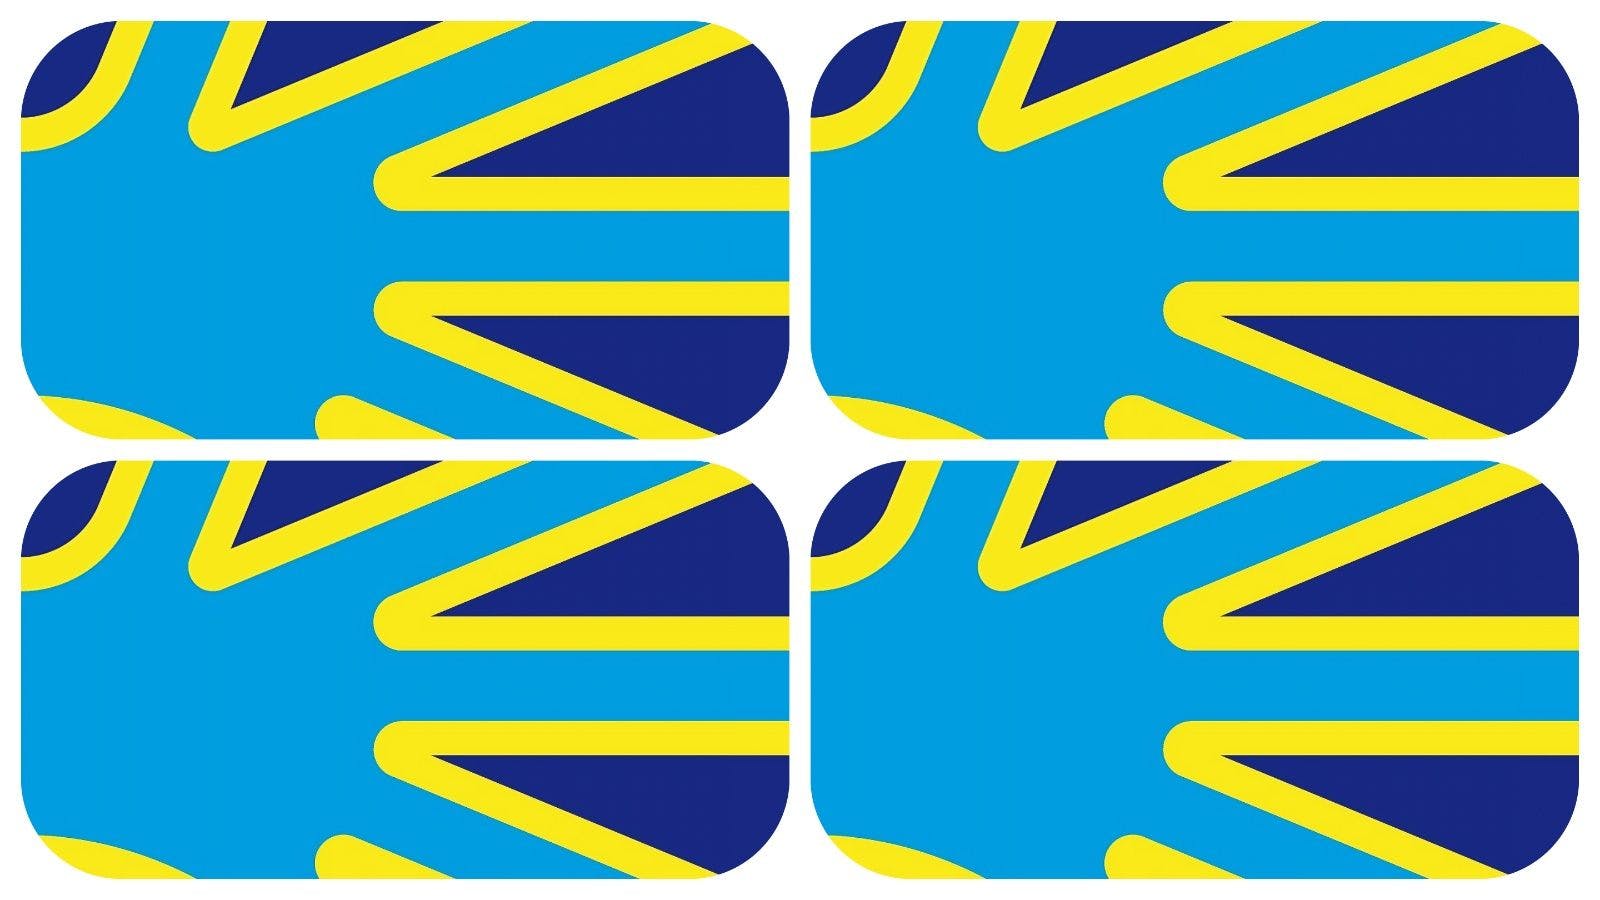 The Deaf Flag by Arnaud Balard, featuring a stylized hand in light blue with yellow outlines on a dark blue background.